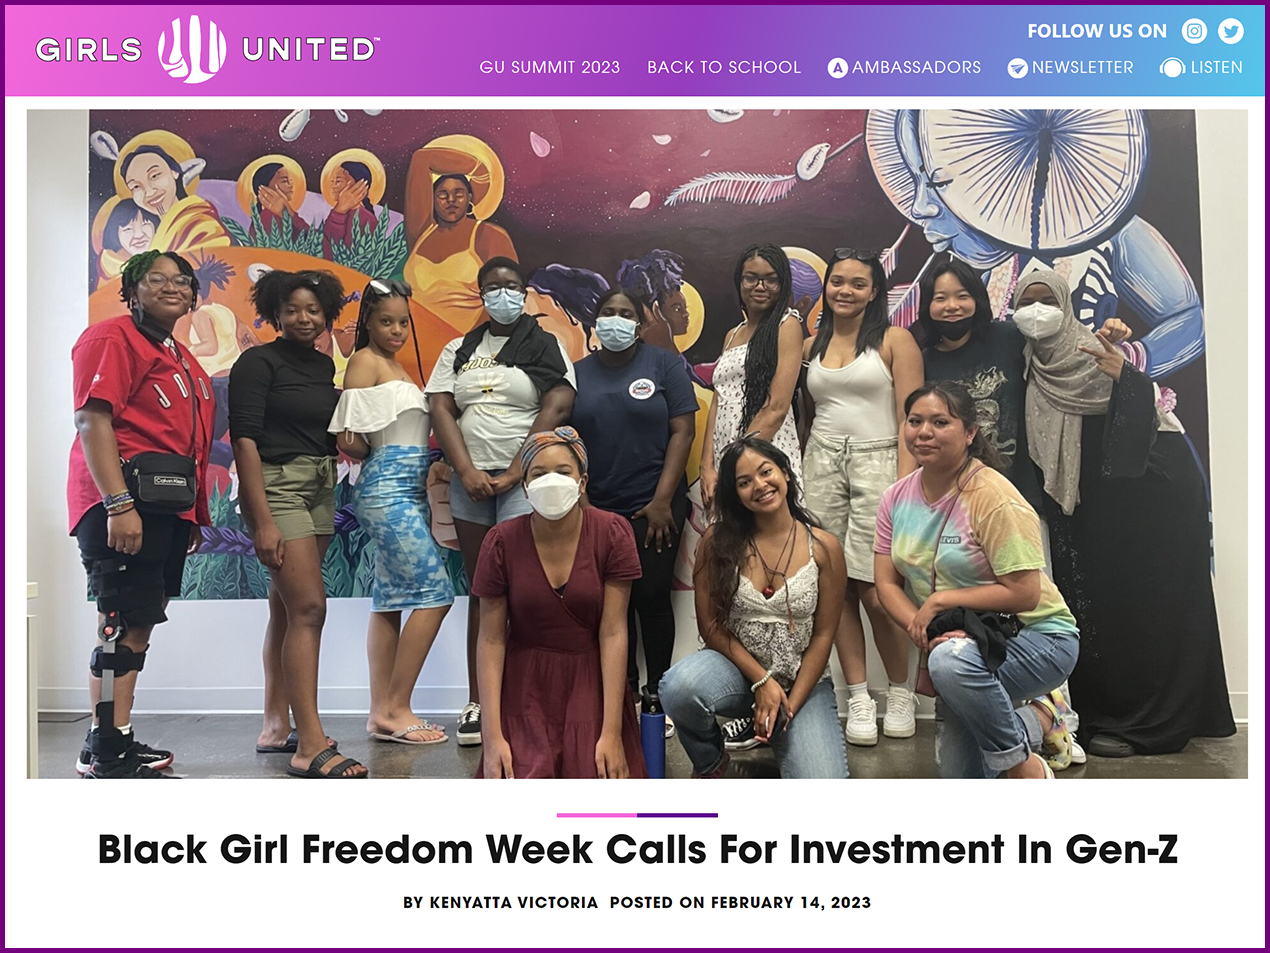 Girls United feature: “Black Girl Freedom Week Calls For Investment In Gen-Z”